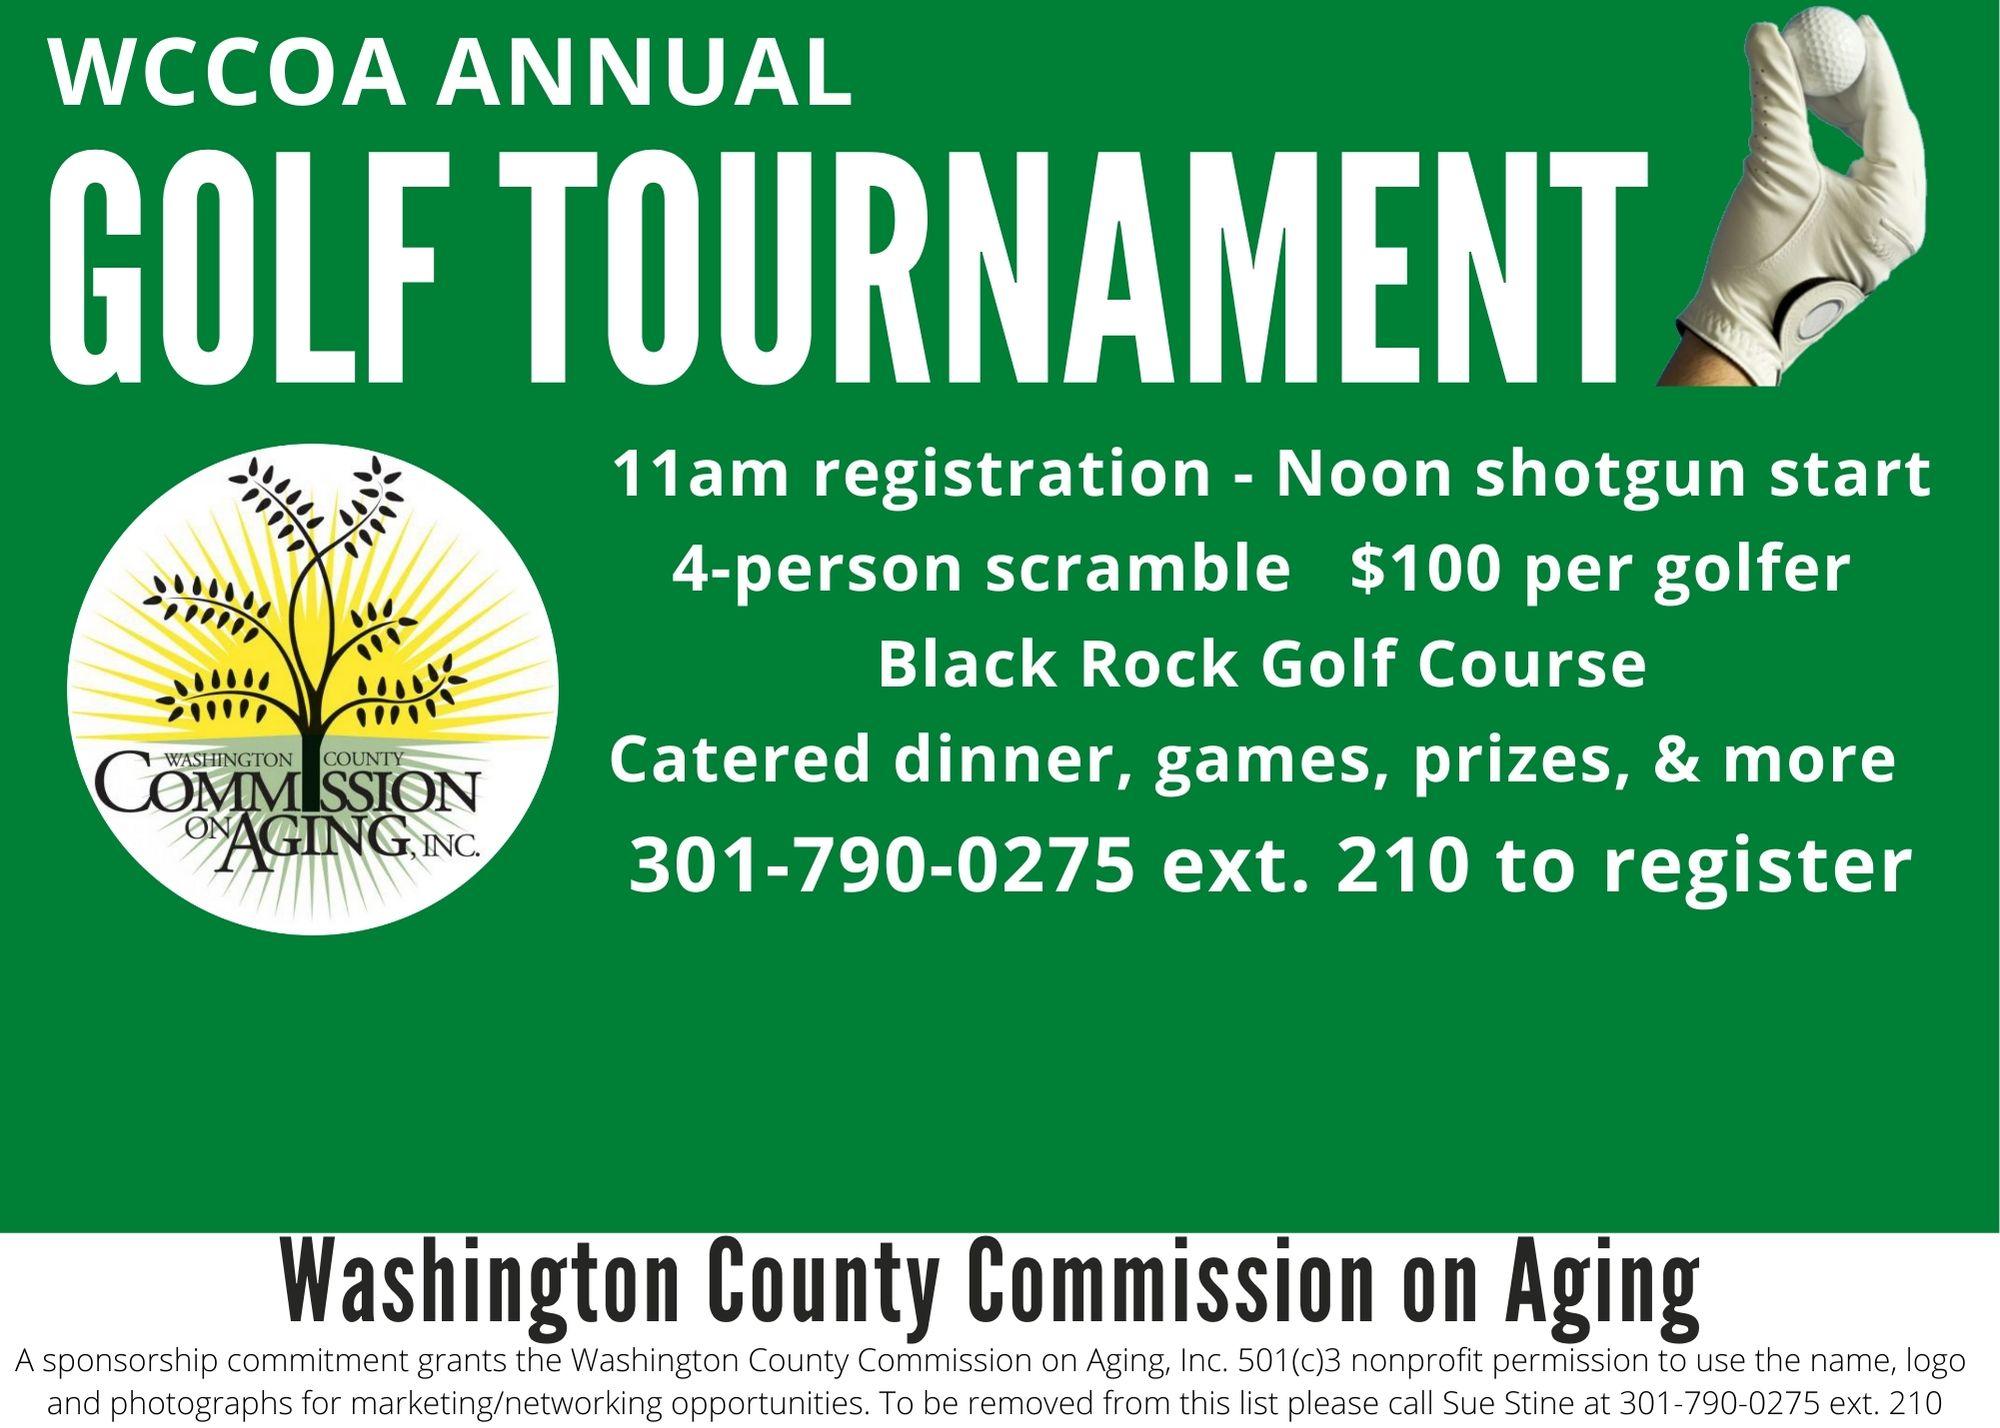 Washington County Commission on Aging Annual Golf Tournament